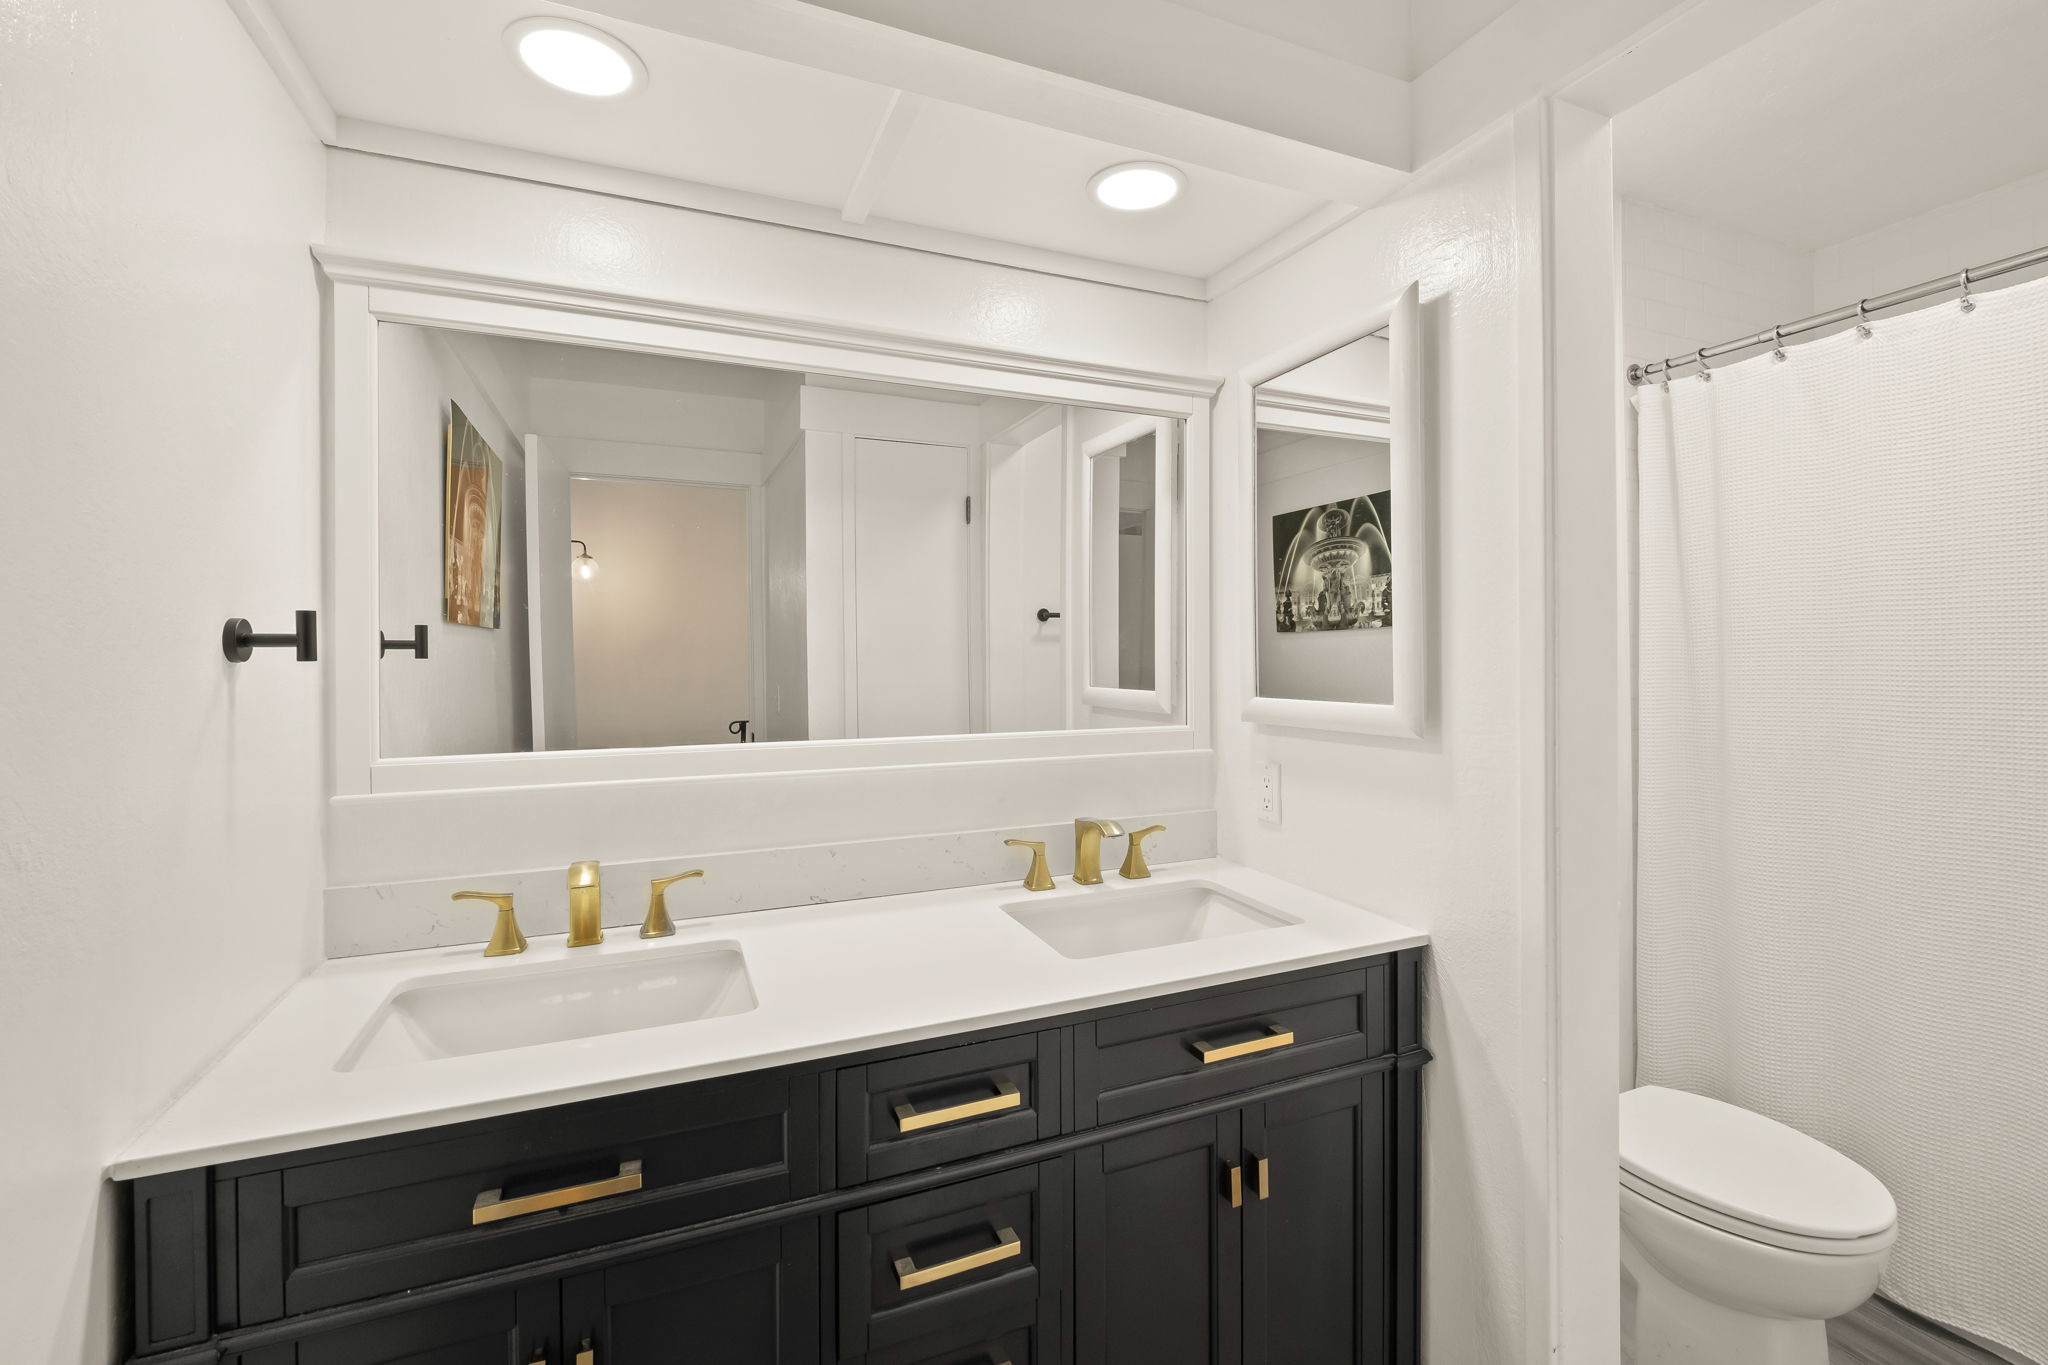 Updated Bath had Modern Vanity w/ Gold touches + Dual Sinks  + recessed lighting